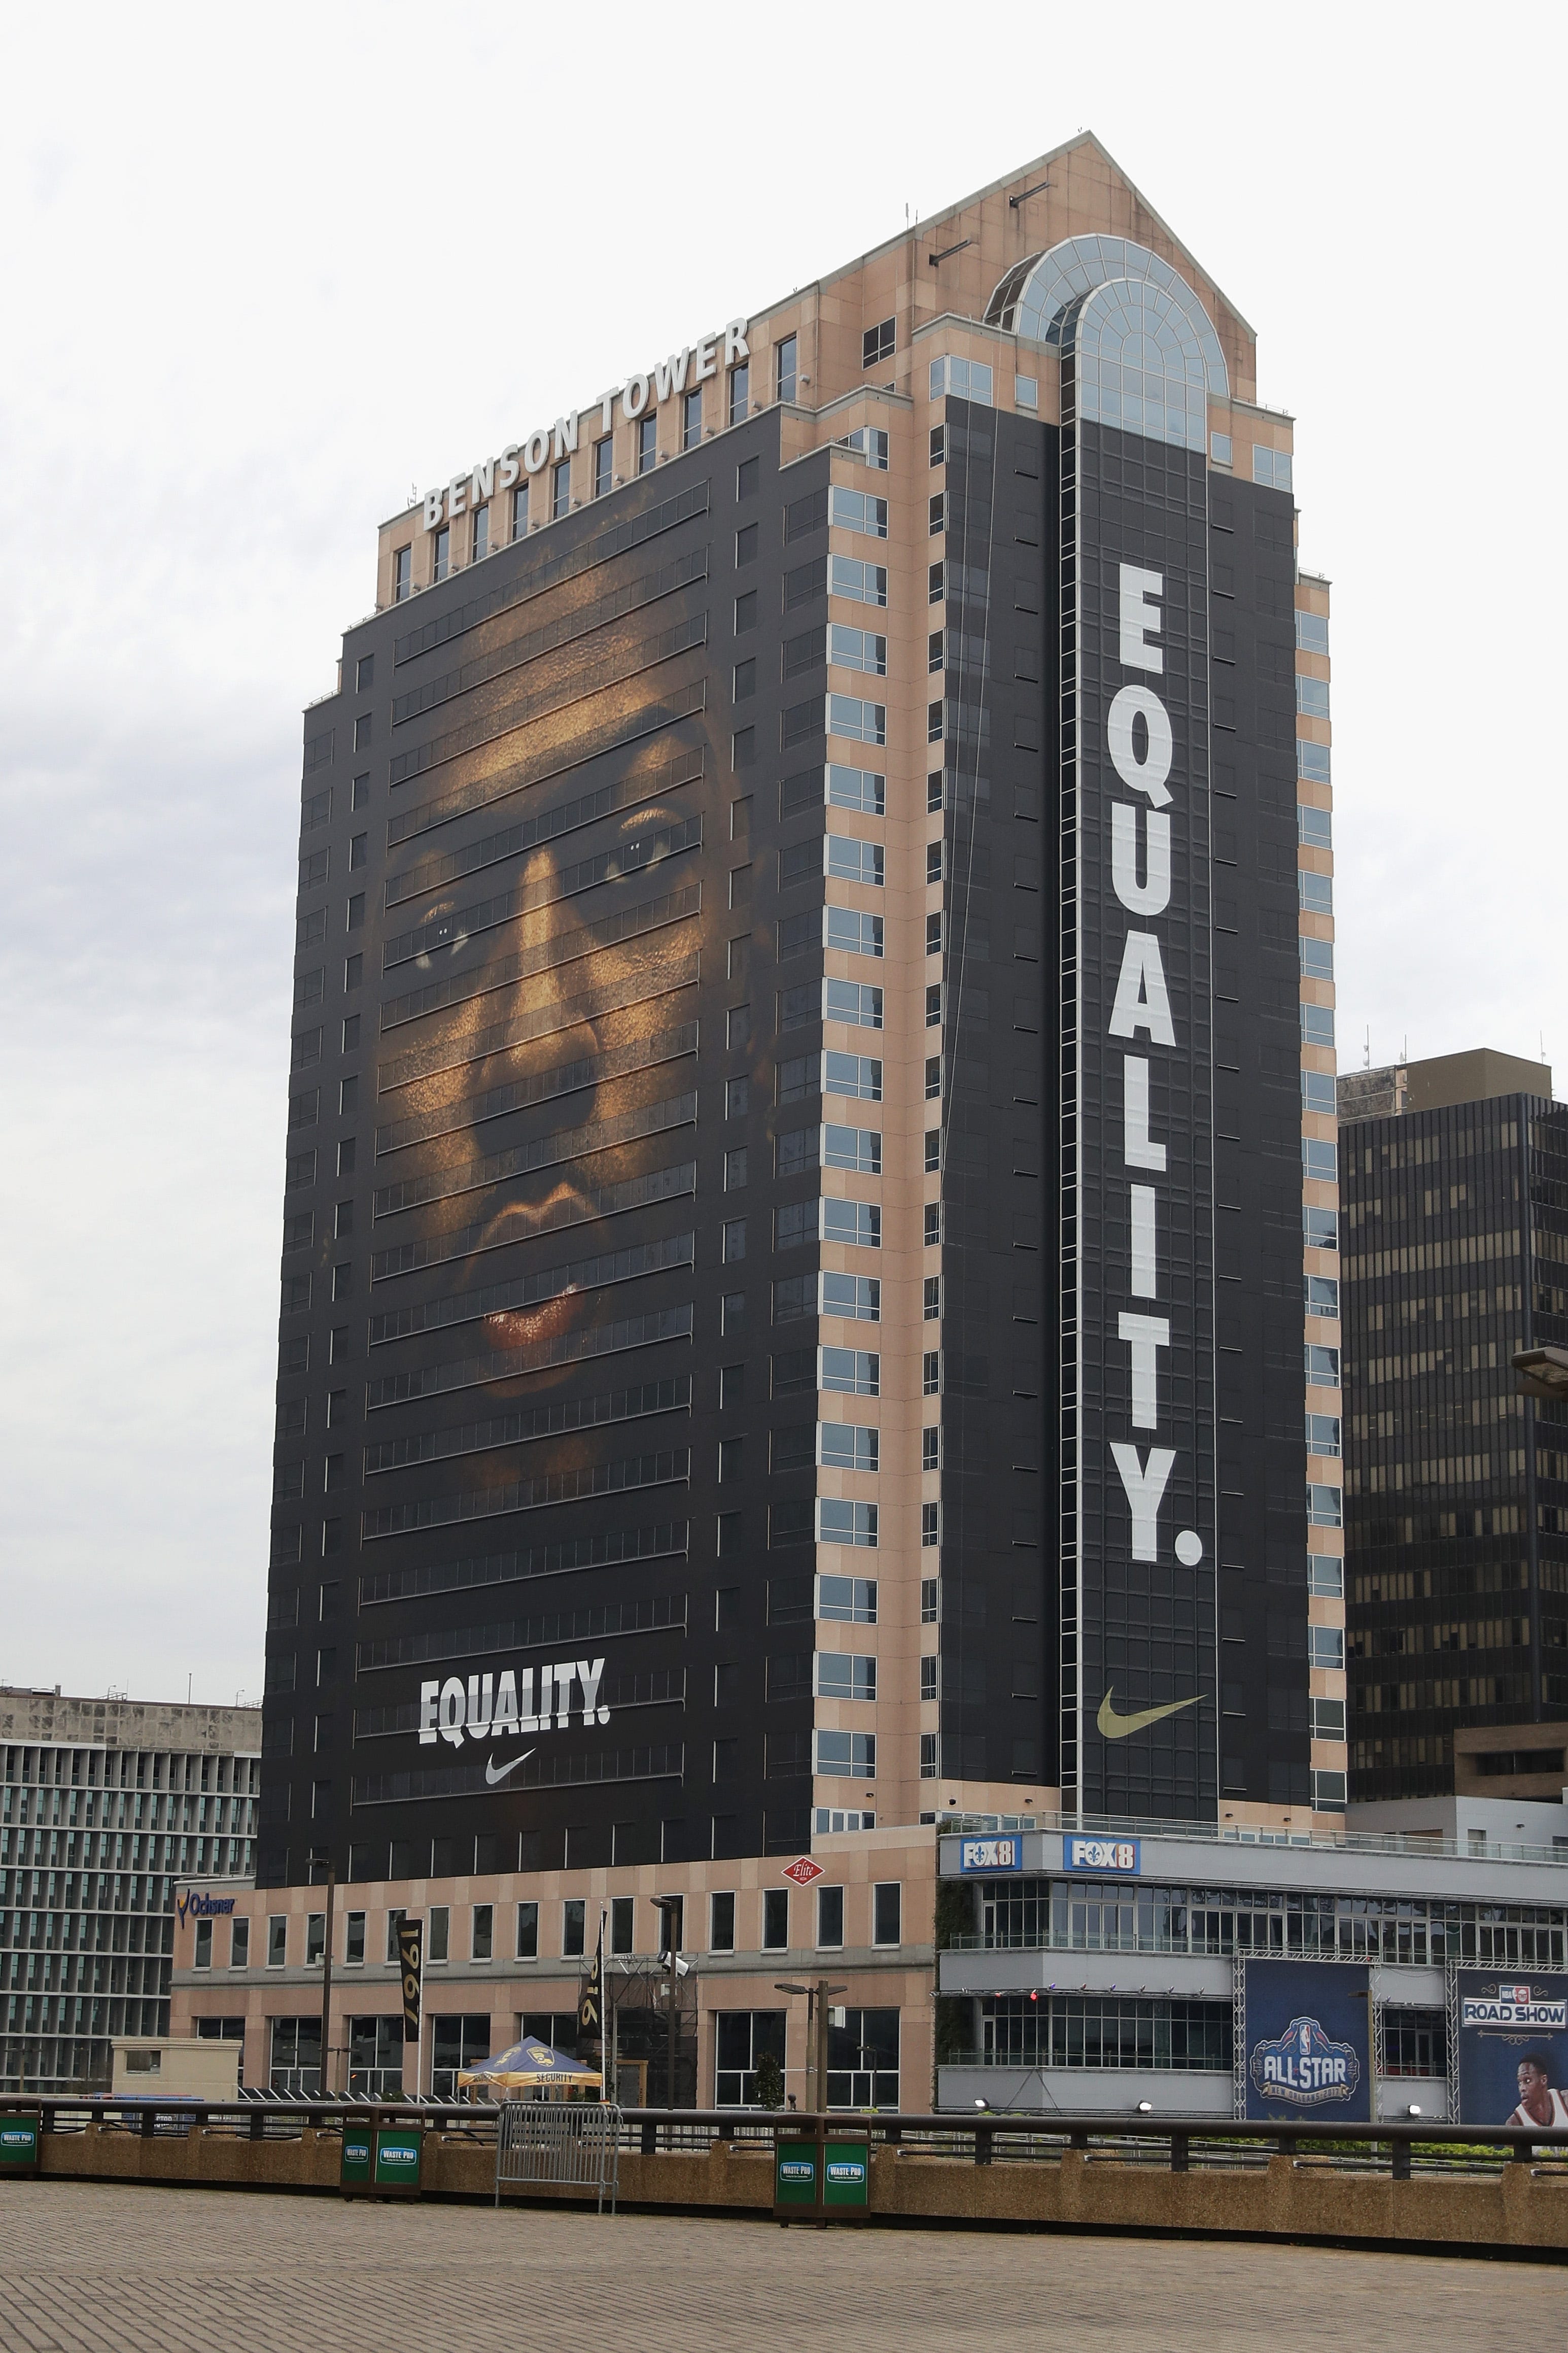 Anthony Davis the face of equality at All-Star weekend